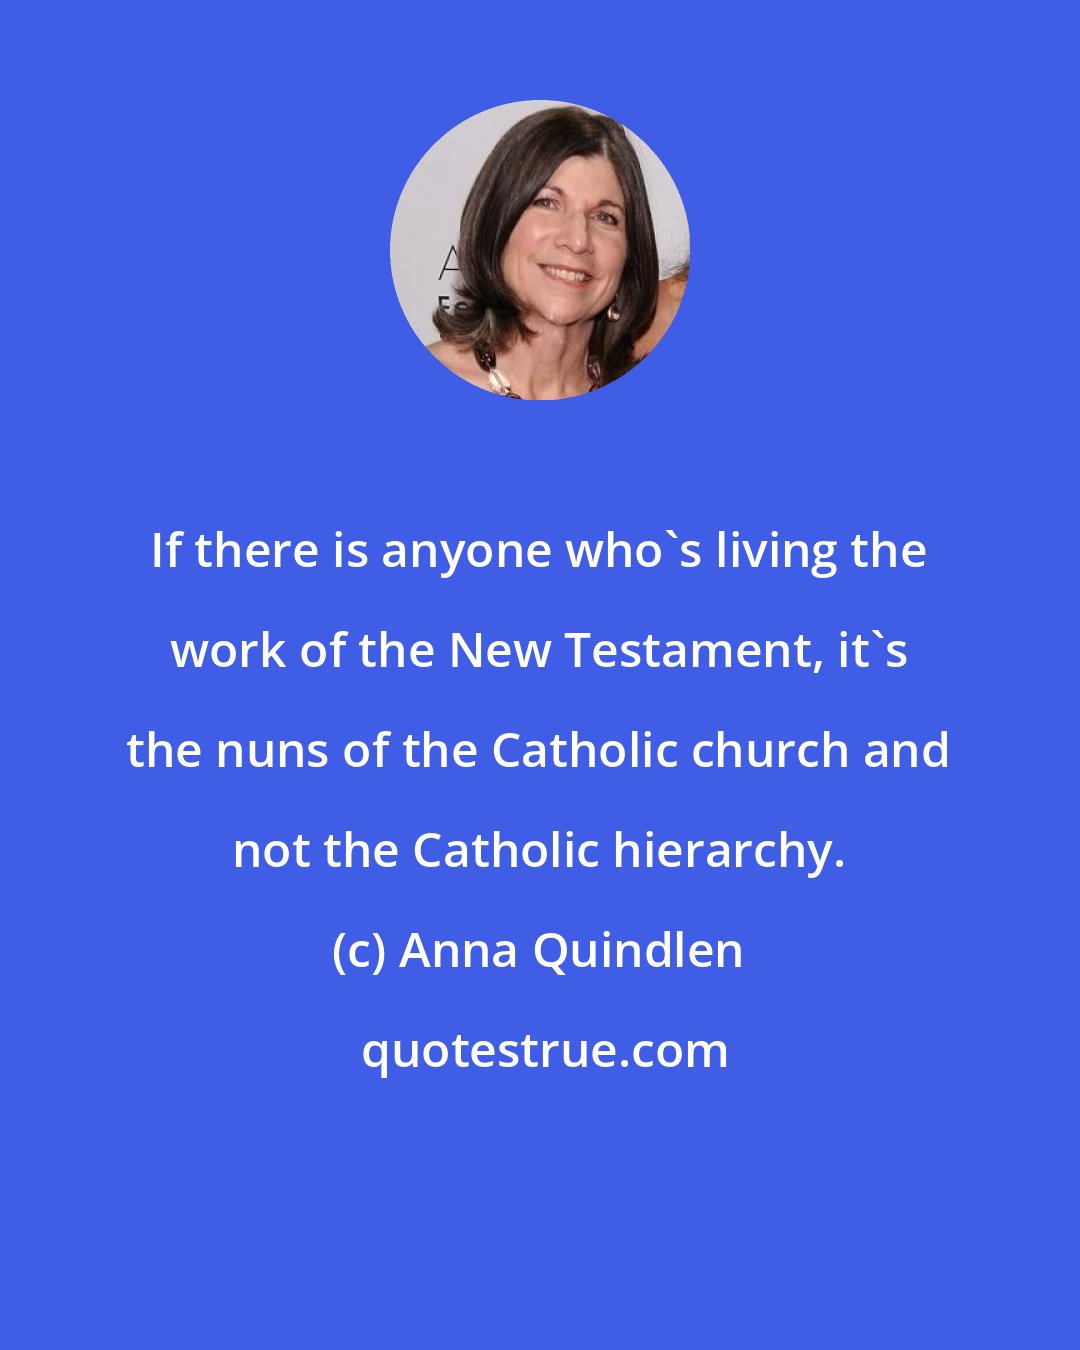 Anna Quindlen: If there is anyone who's living the work of the New Testament, it's the nuns of the Catholic church and not the Catholic hierarchy.